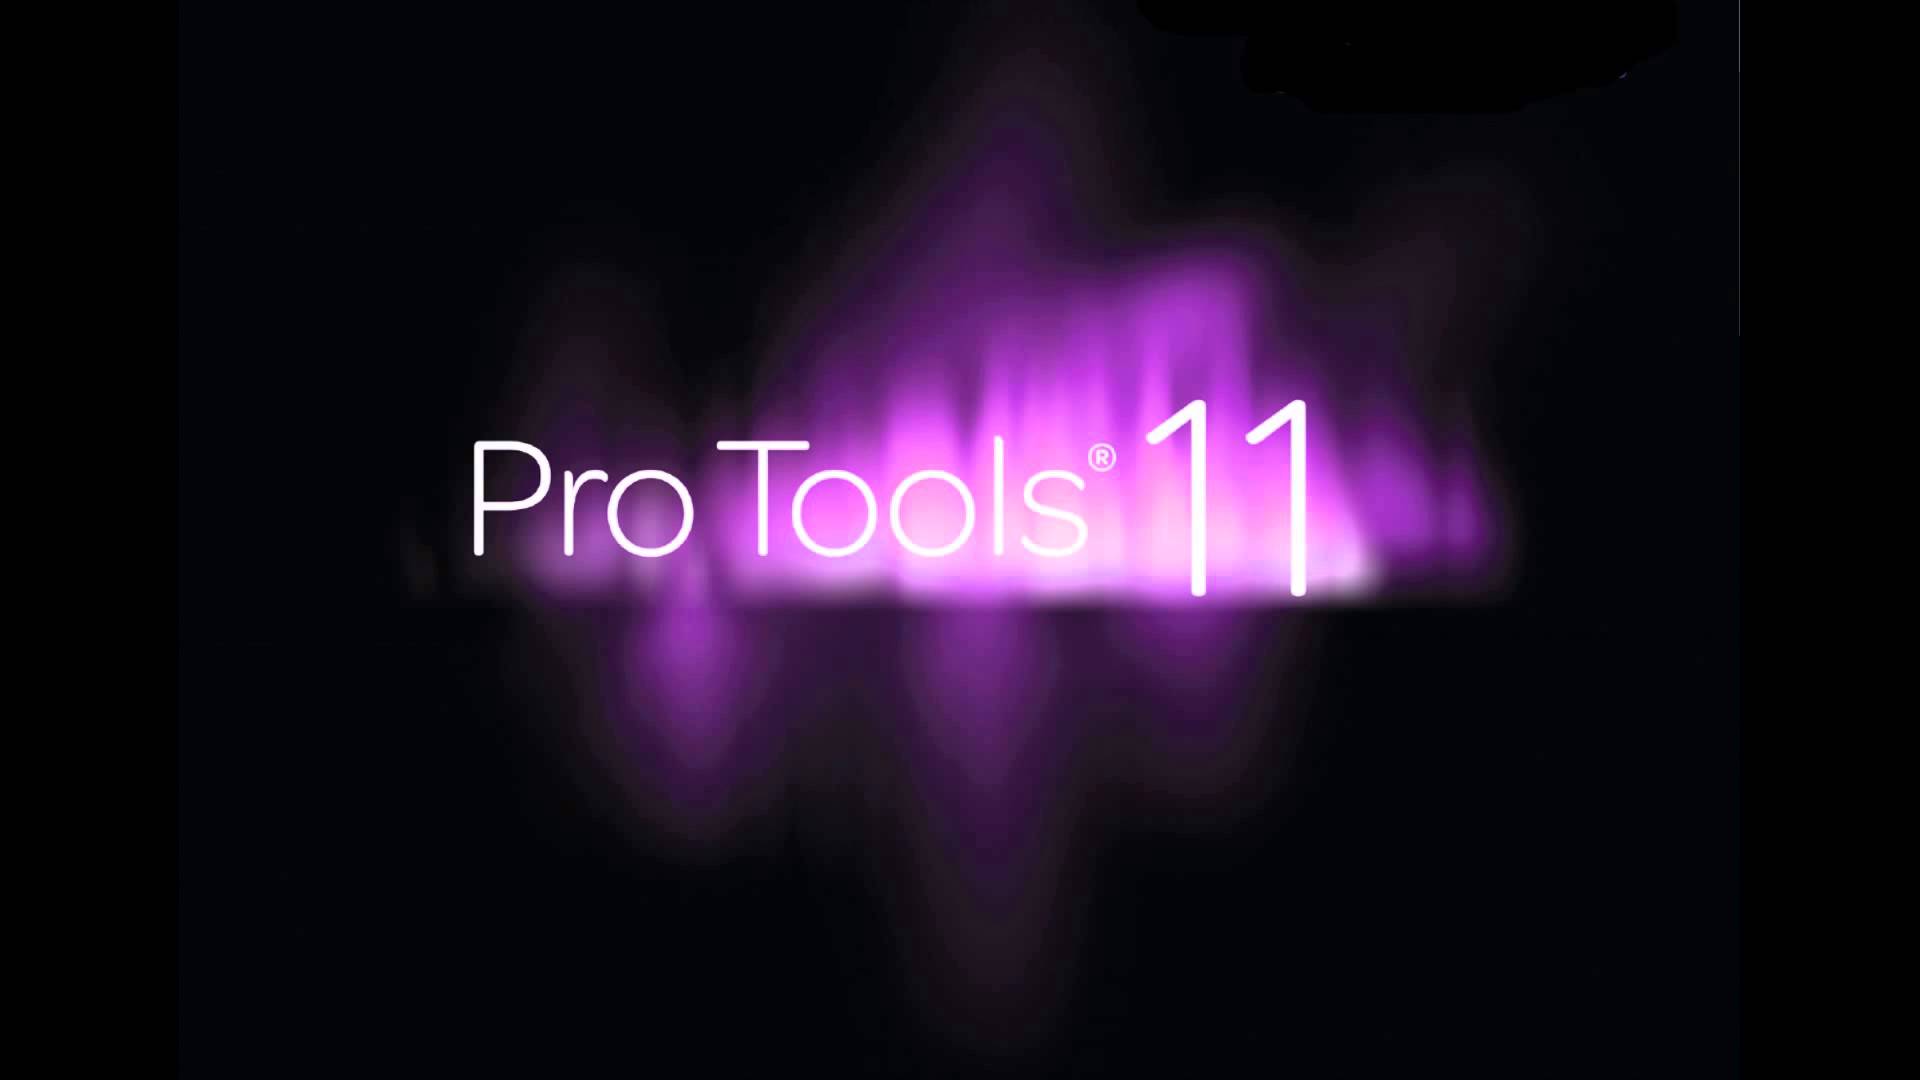 Pro Tools 11 Announcement - YouTube